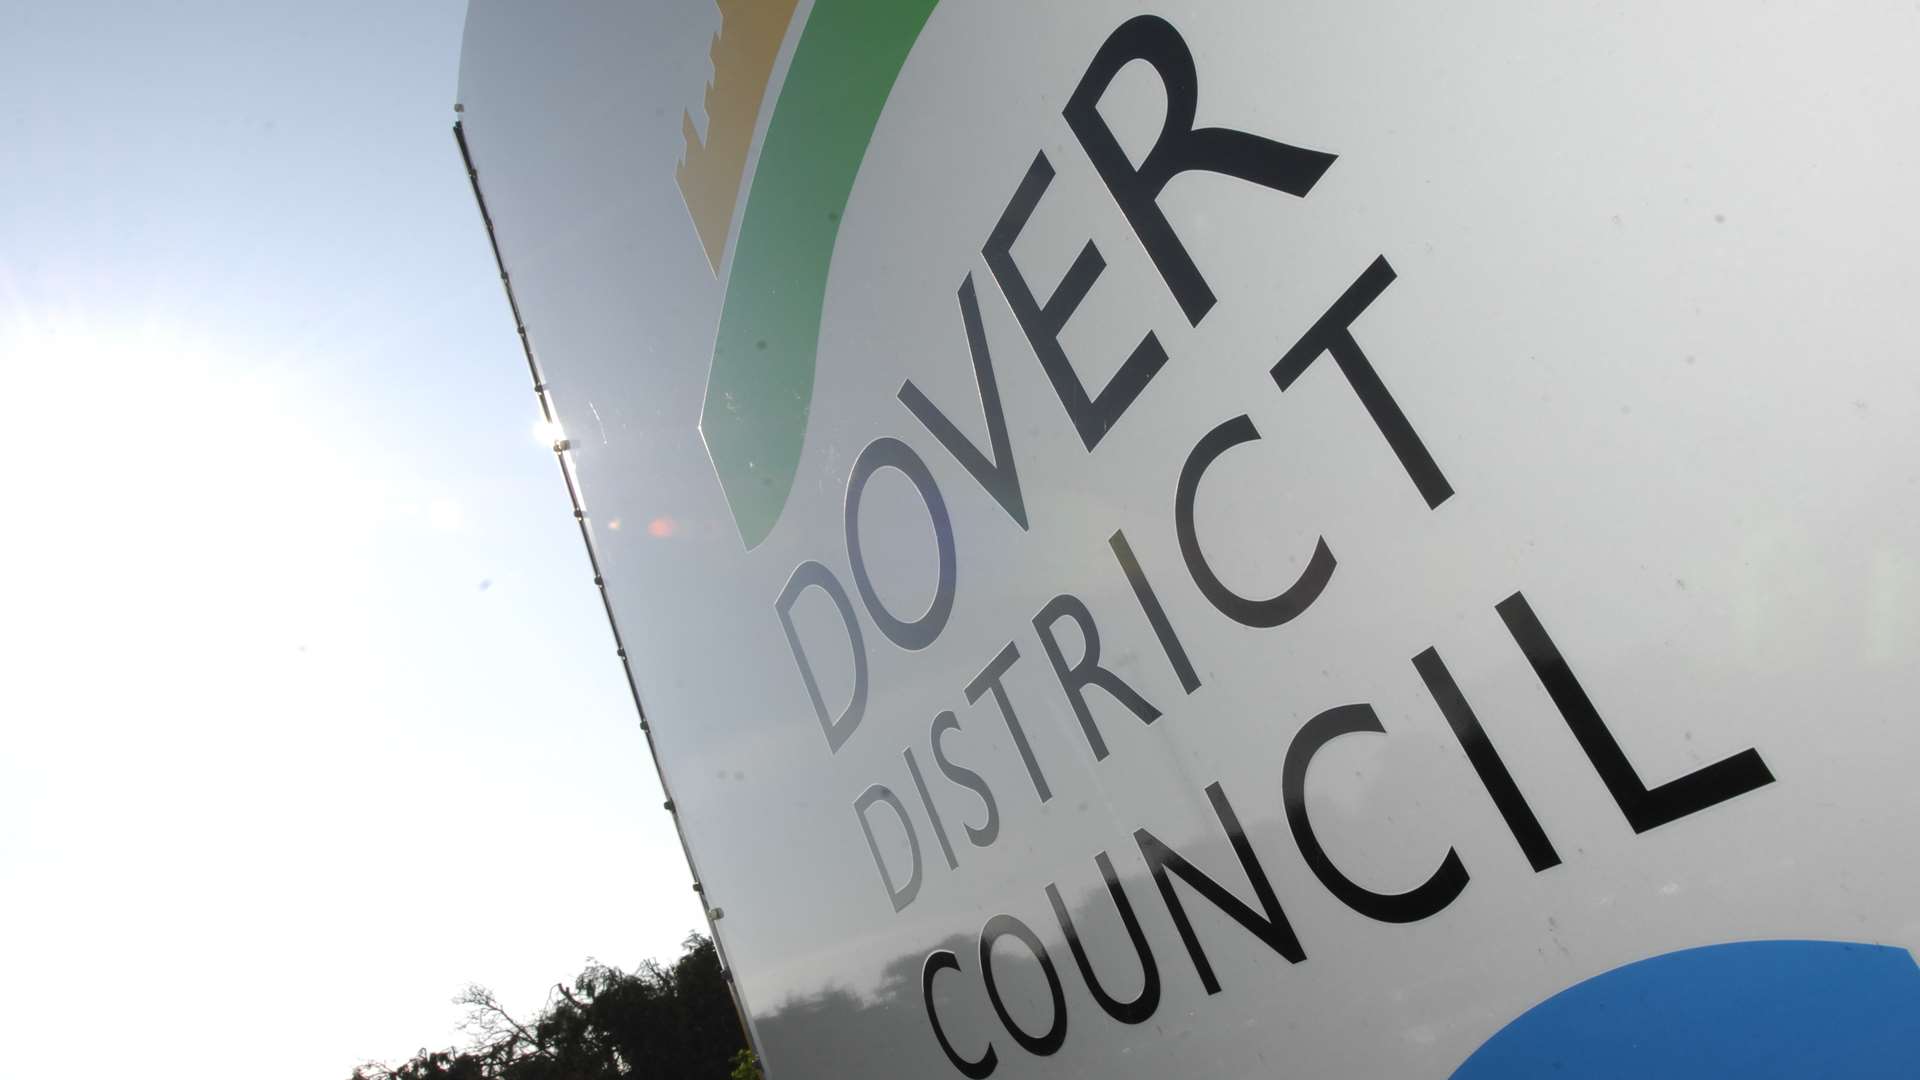 Dover District Council - trying to save the homeless from freezing weather